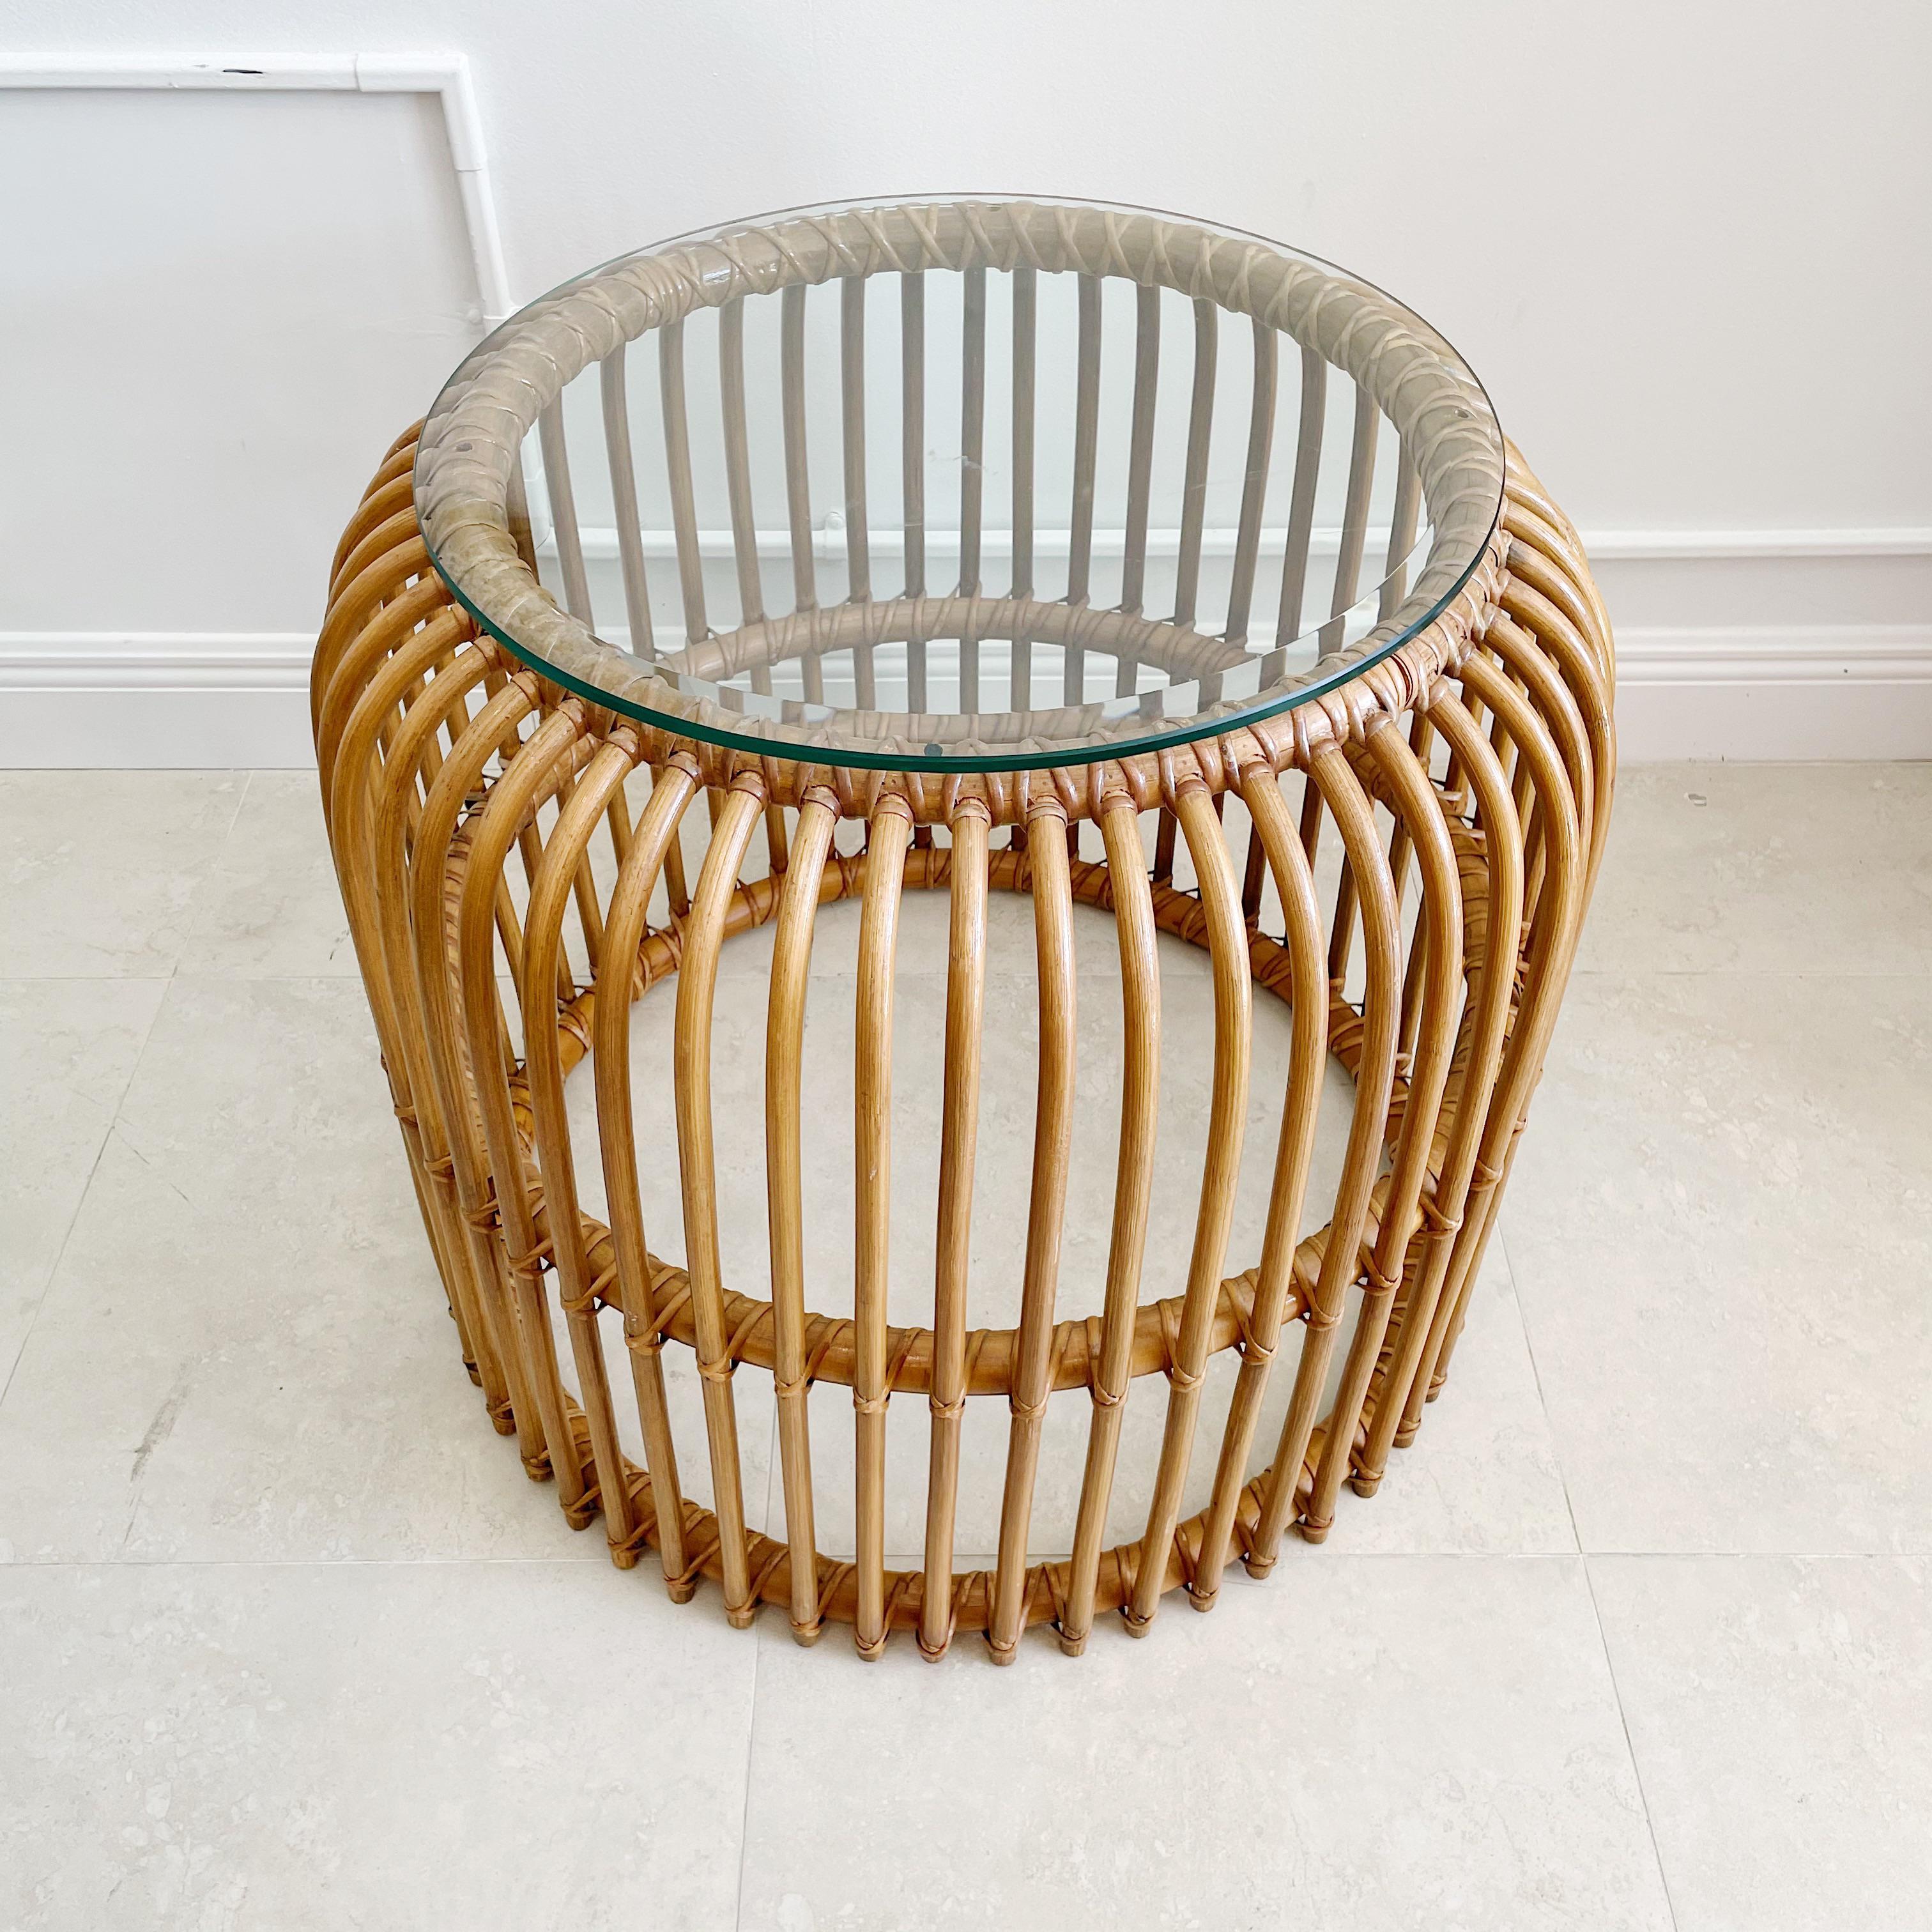 Extremely Rare Henry Olko for Willow and Reed, Rib Group 5120 bent rattan rib table. Fully restored to original condition. With original circular glass top.